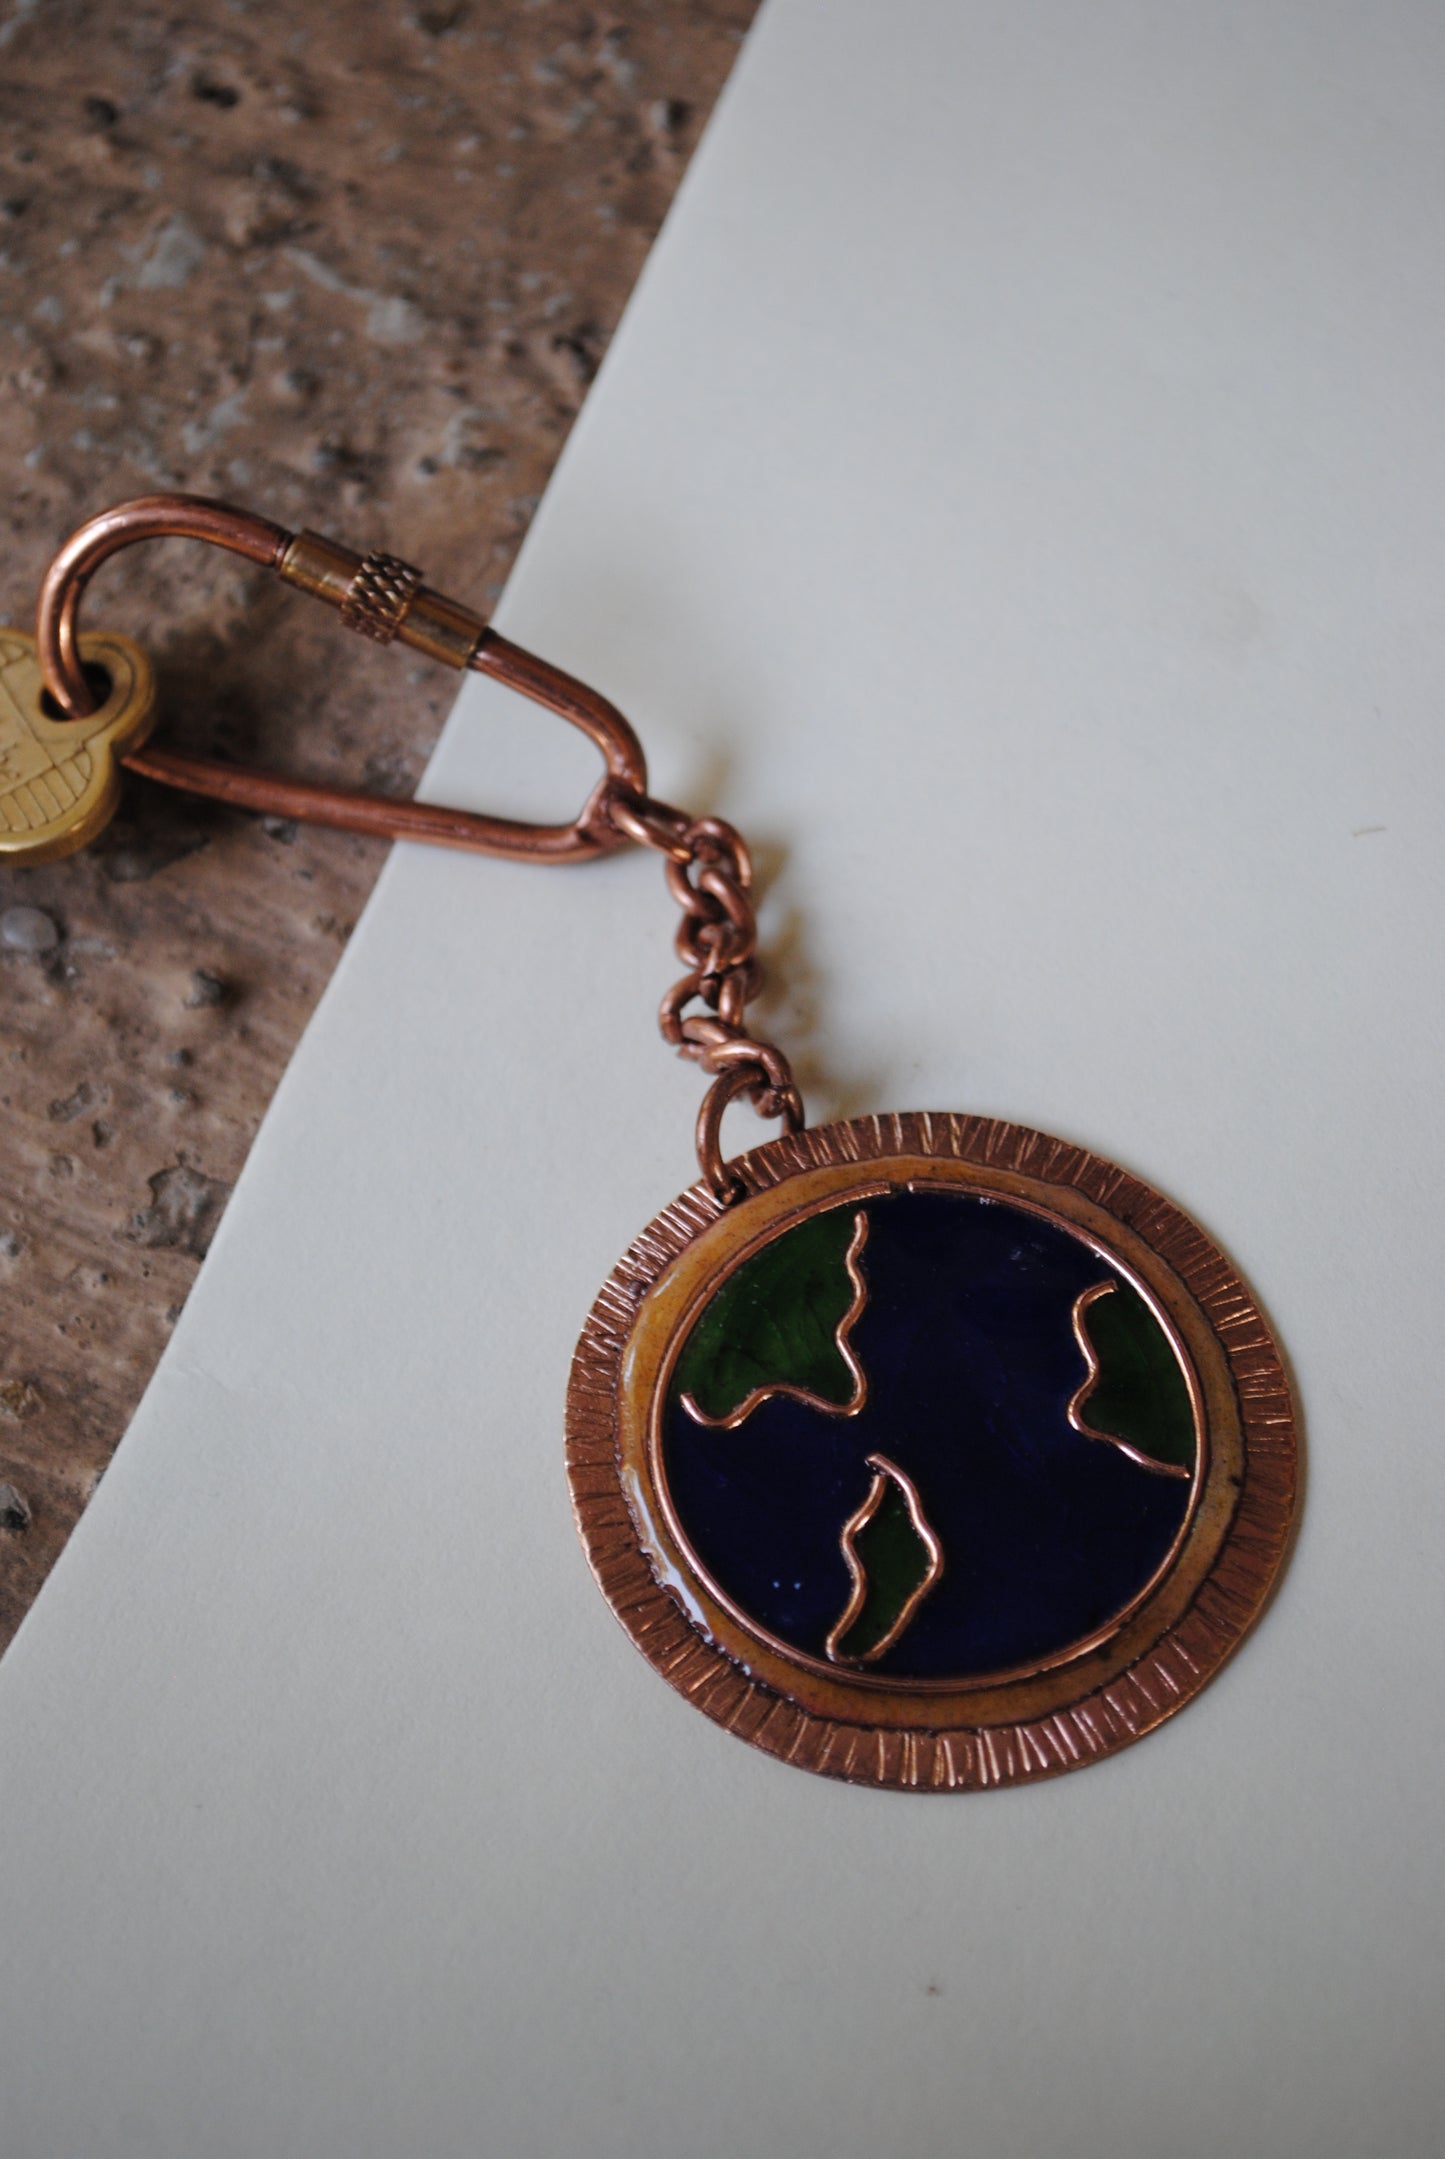 Copper enamel trinkets, funky keychains handcrafted in Maharashtra, India. World map theme